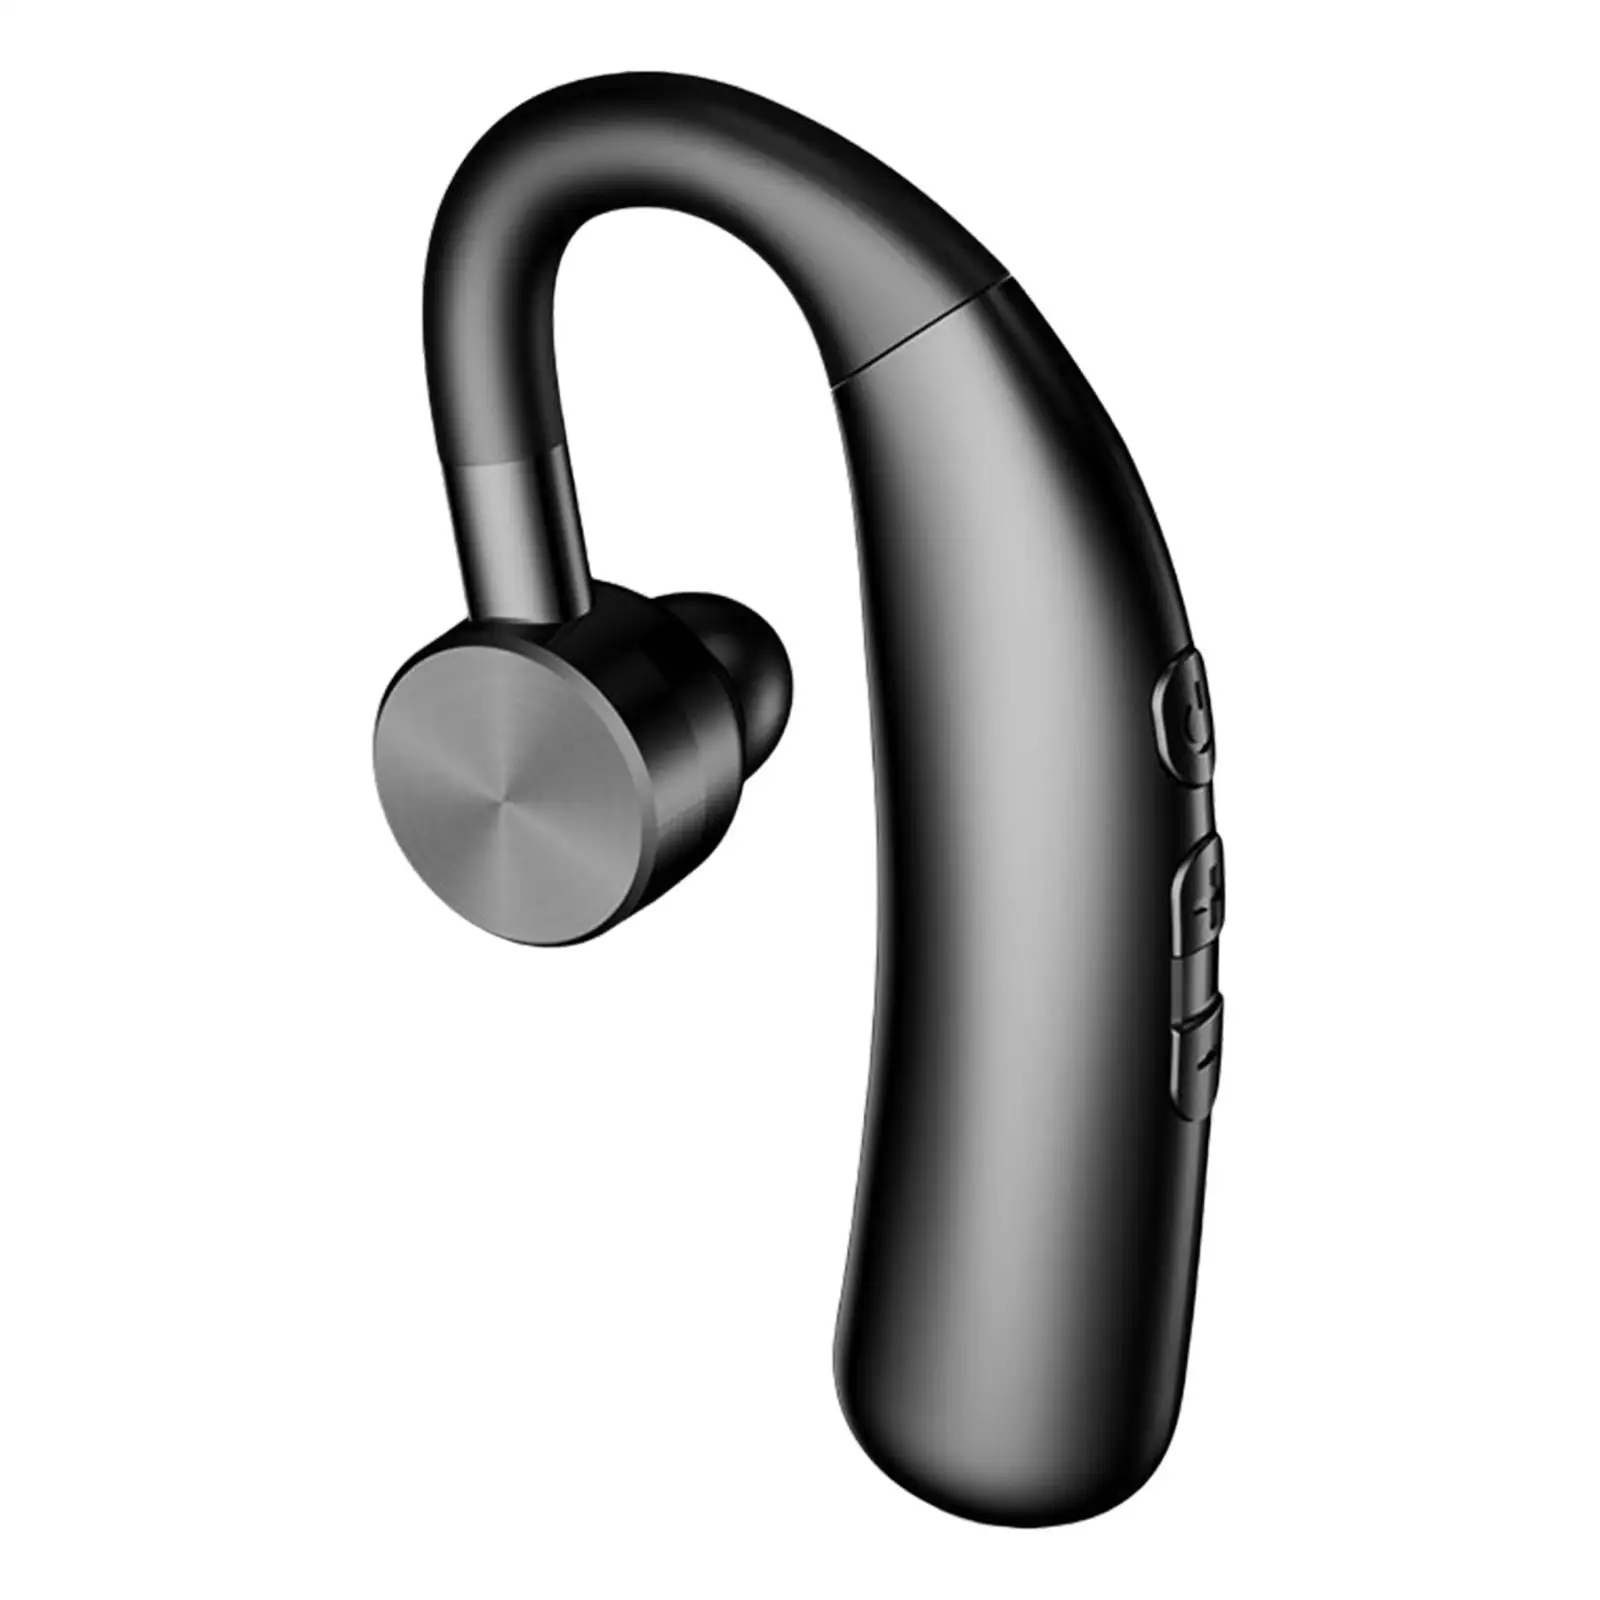 x7 Wireless Bluetooth Headset V5.0 HD Calling 180 Rotating with Built-In Mic Earpiece for Phone Business Office Workout Tablet